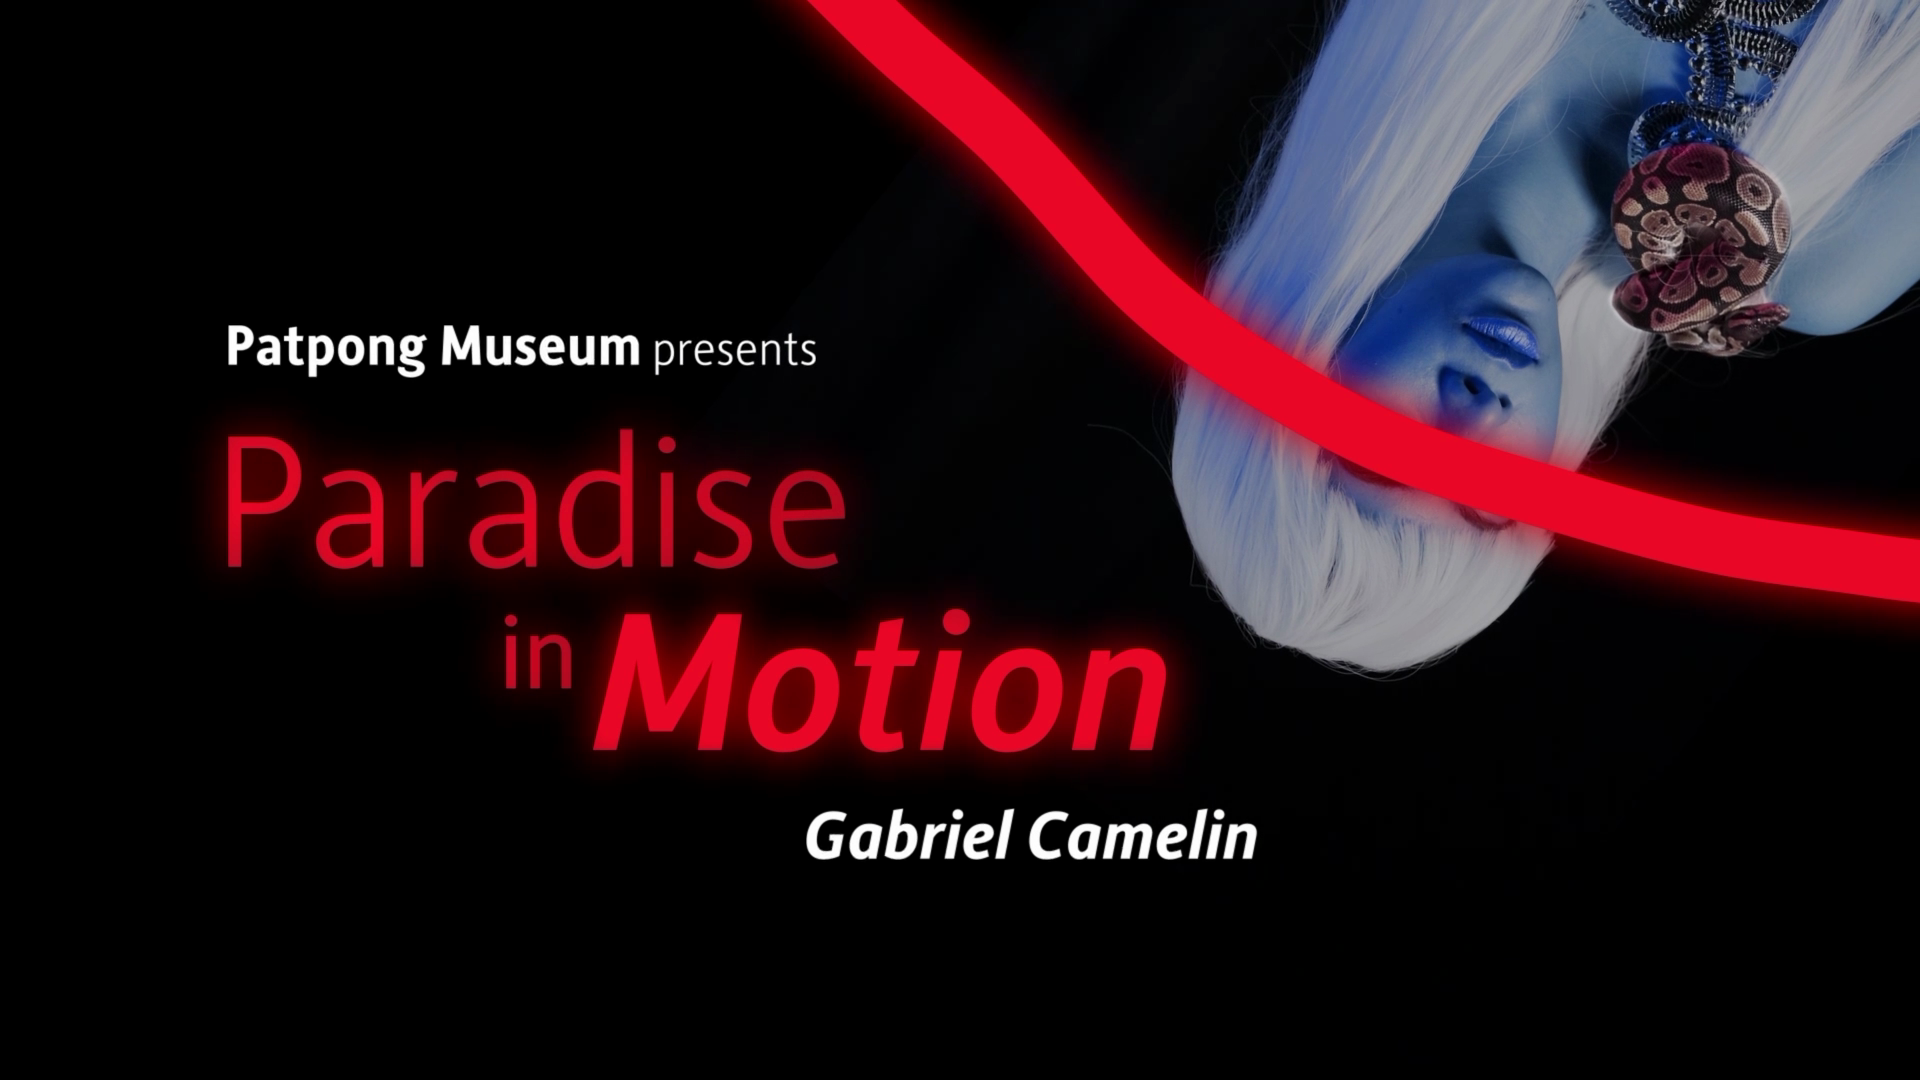 Poster for the event Paradise in Motion